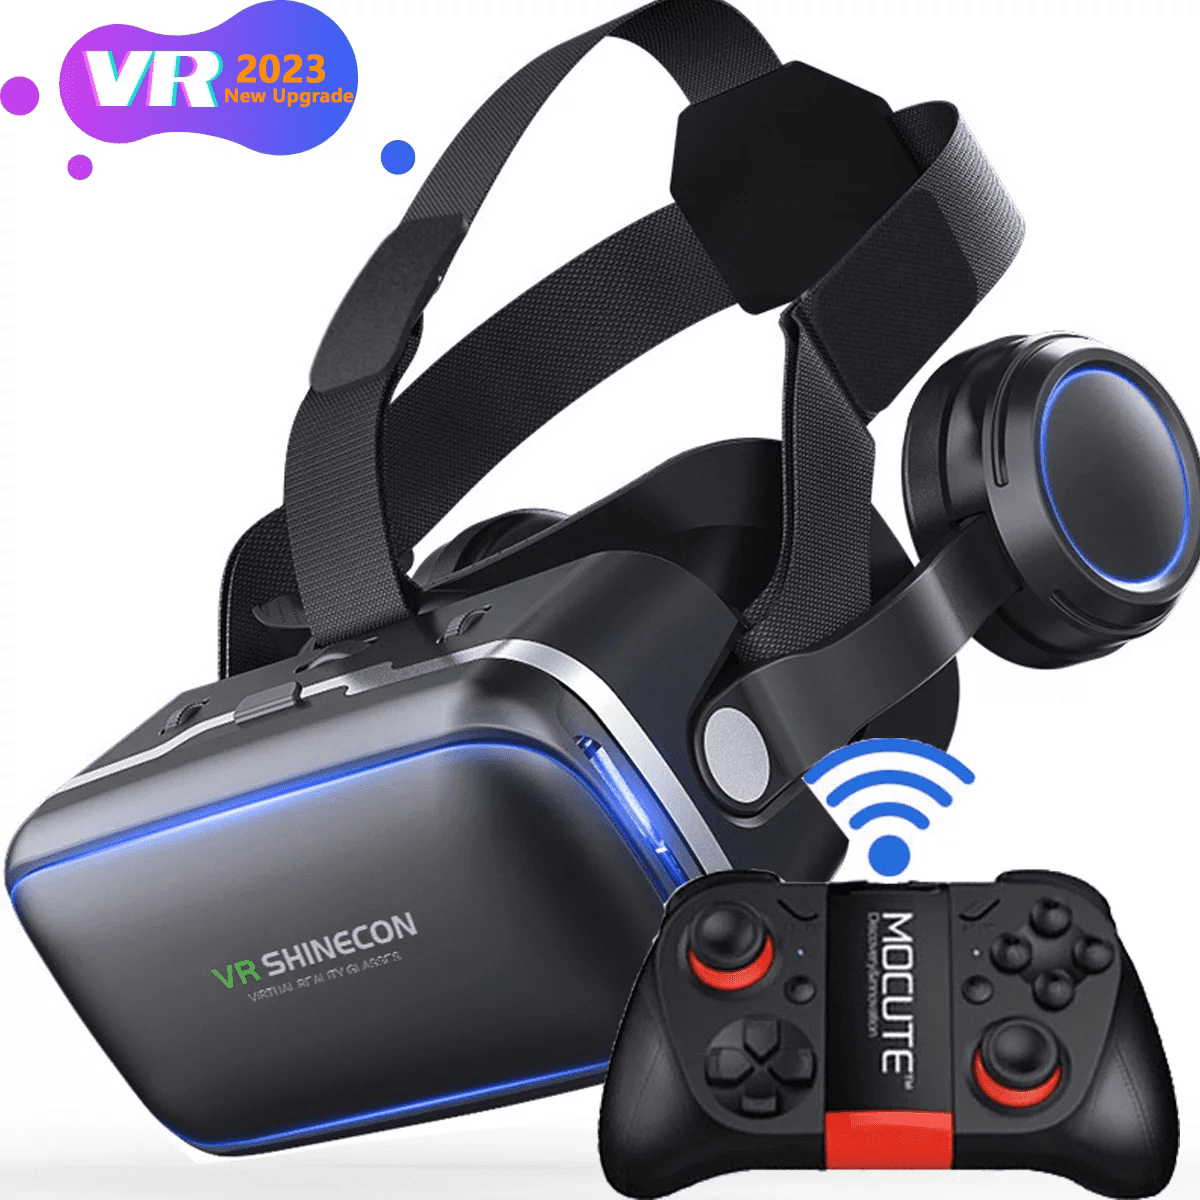 Upgraded 2023 VR Glasses with Remote Controller, 3D Glasses Virtual Reality Headset for VR Games & 3D Eye System for iPhone and Android Smartphones 3D VR Glasses（Black） - Walmart.com